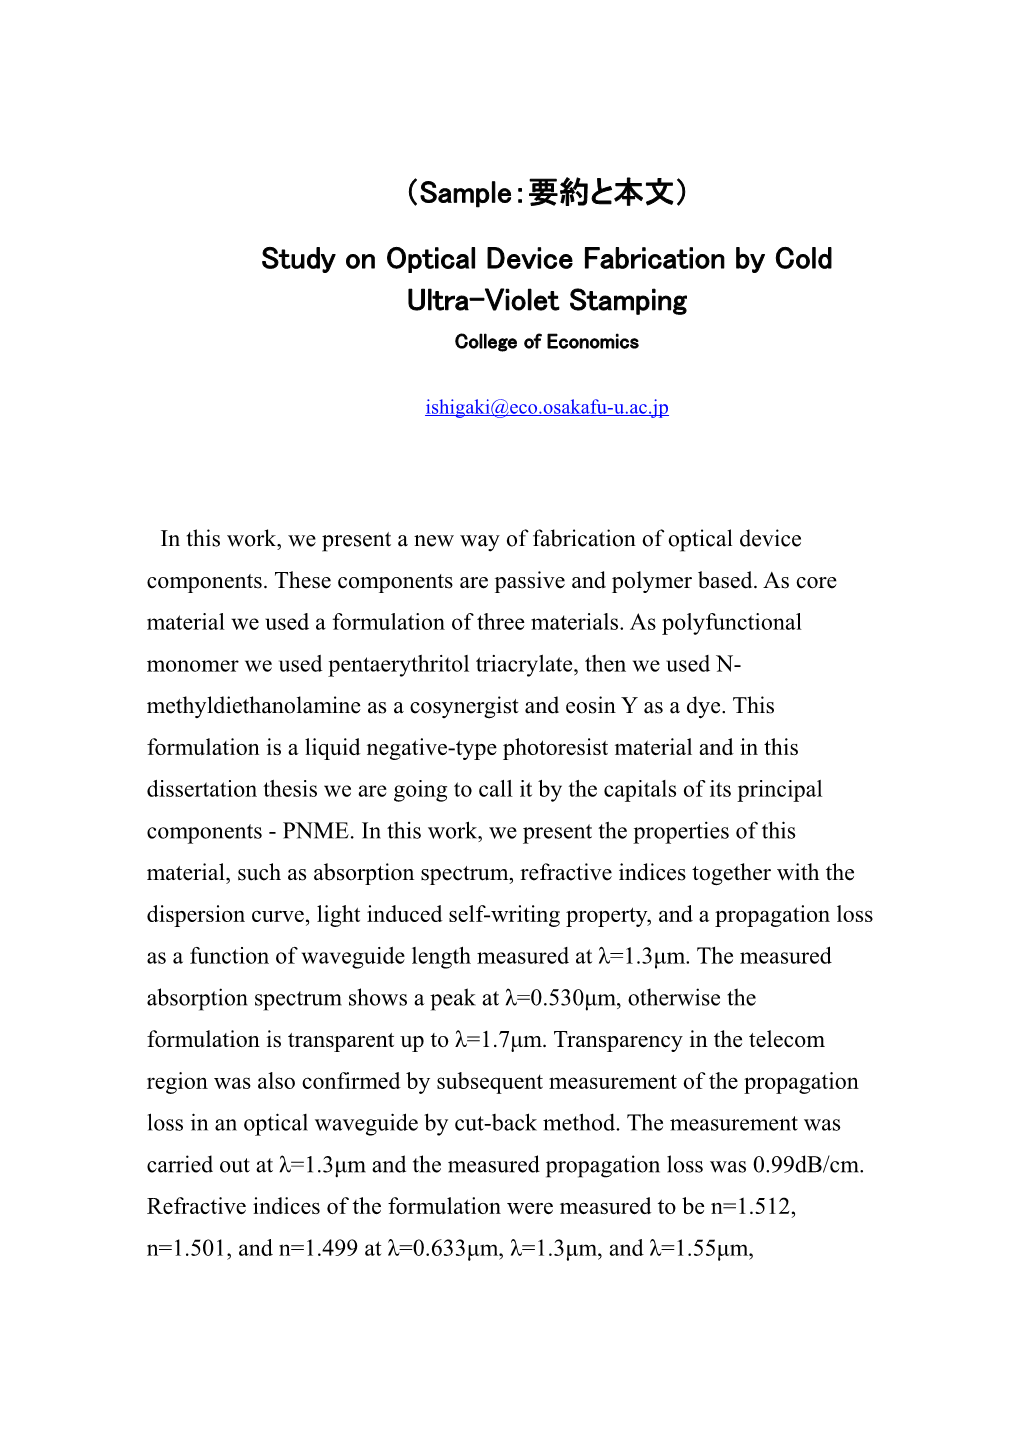 Study on Optical Device Fabrication by Cold Ultra-Violet Stamping College of Economics